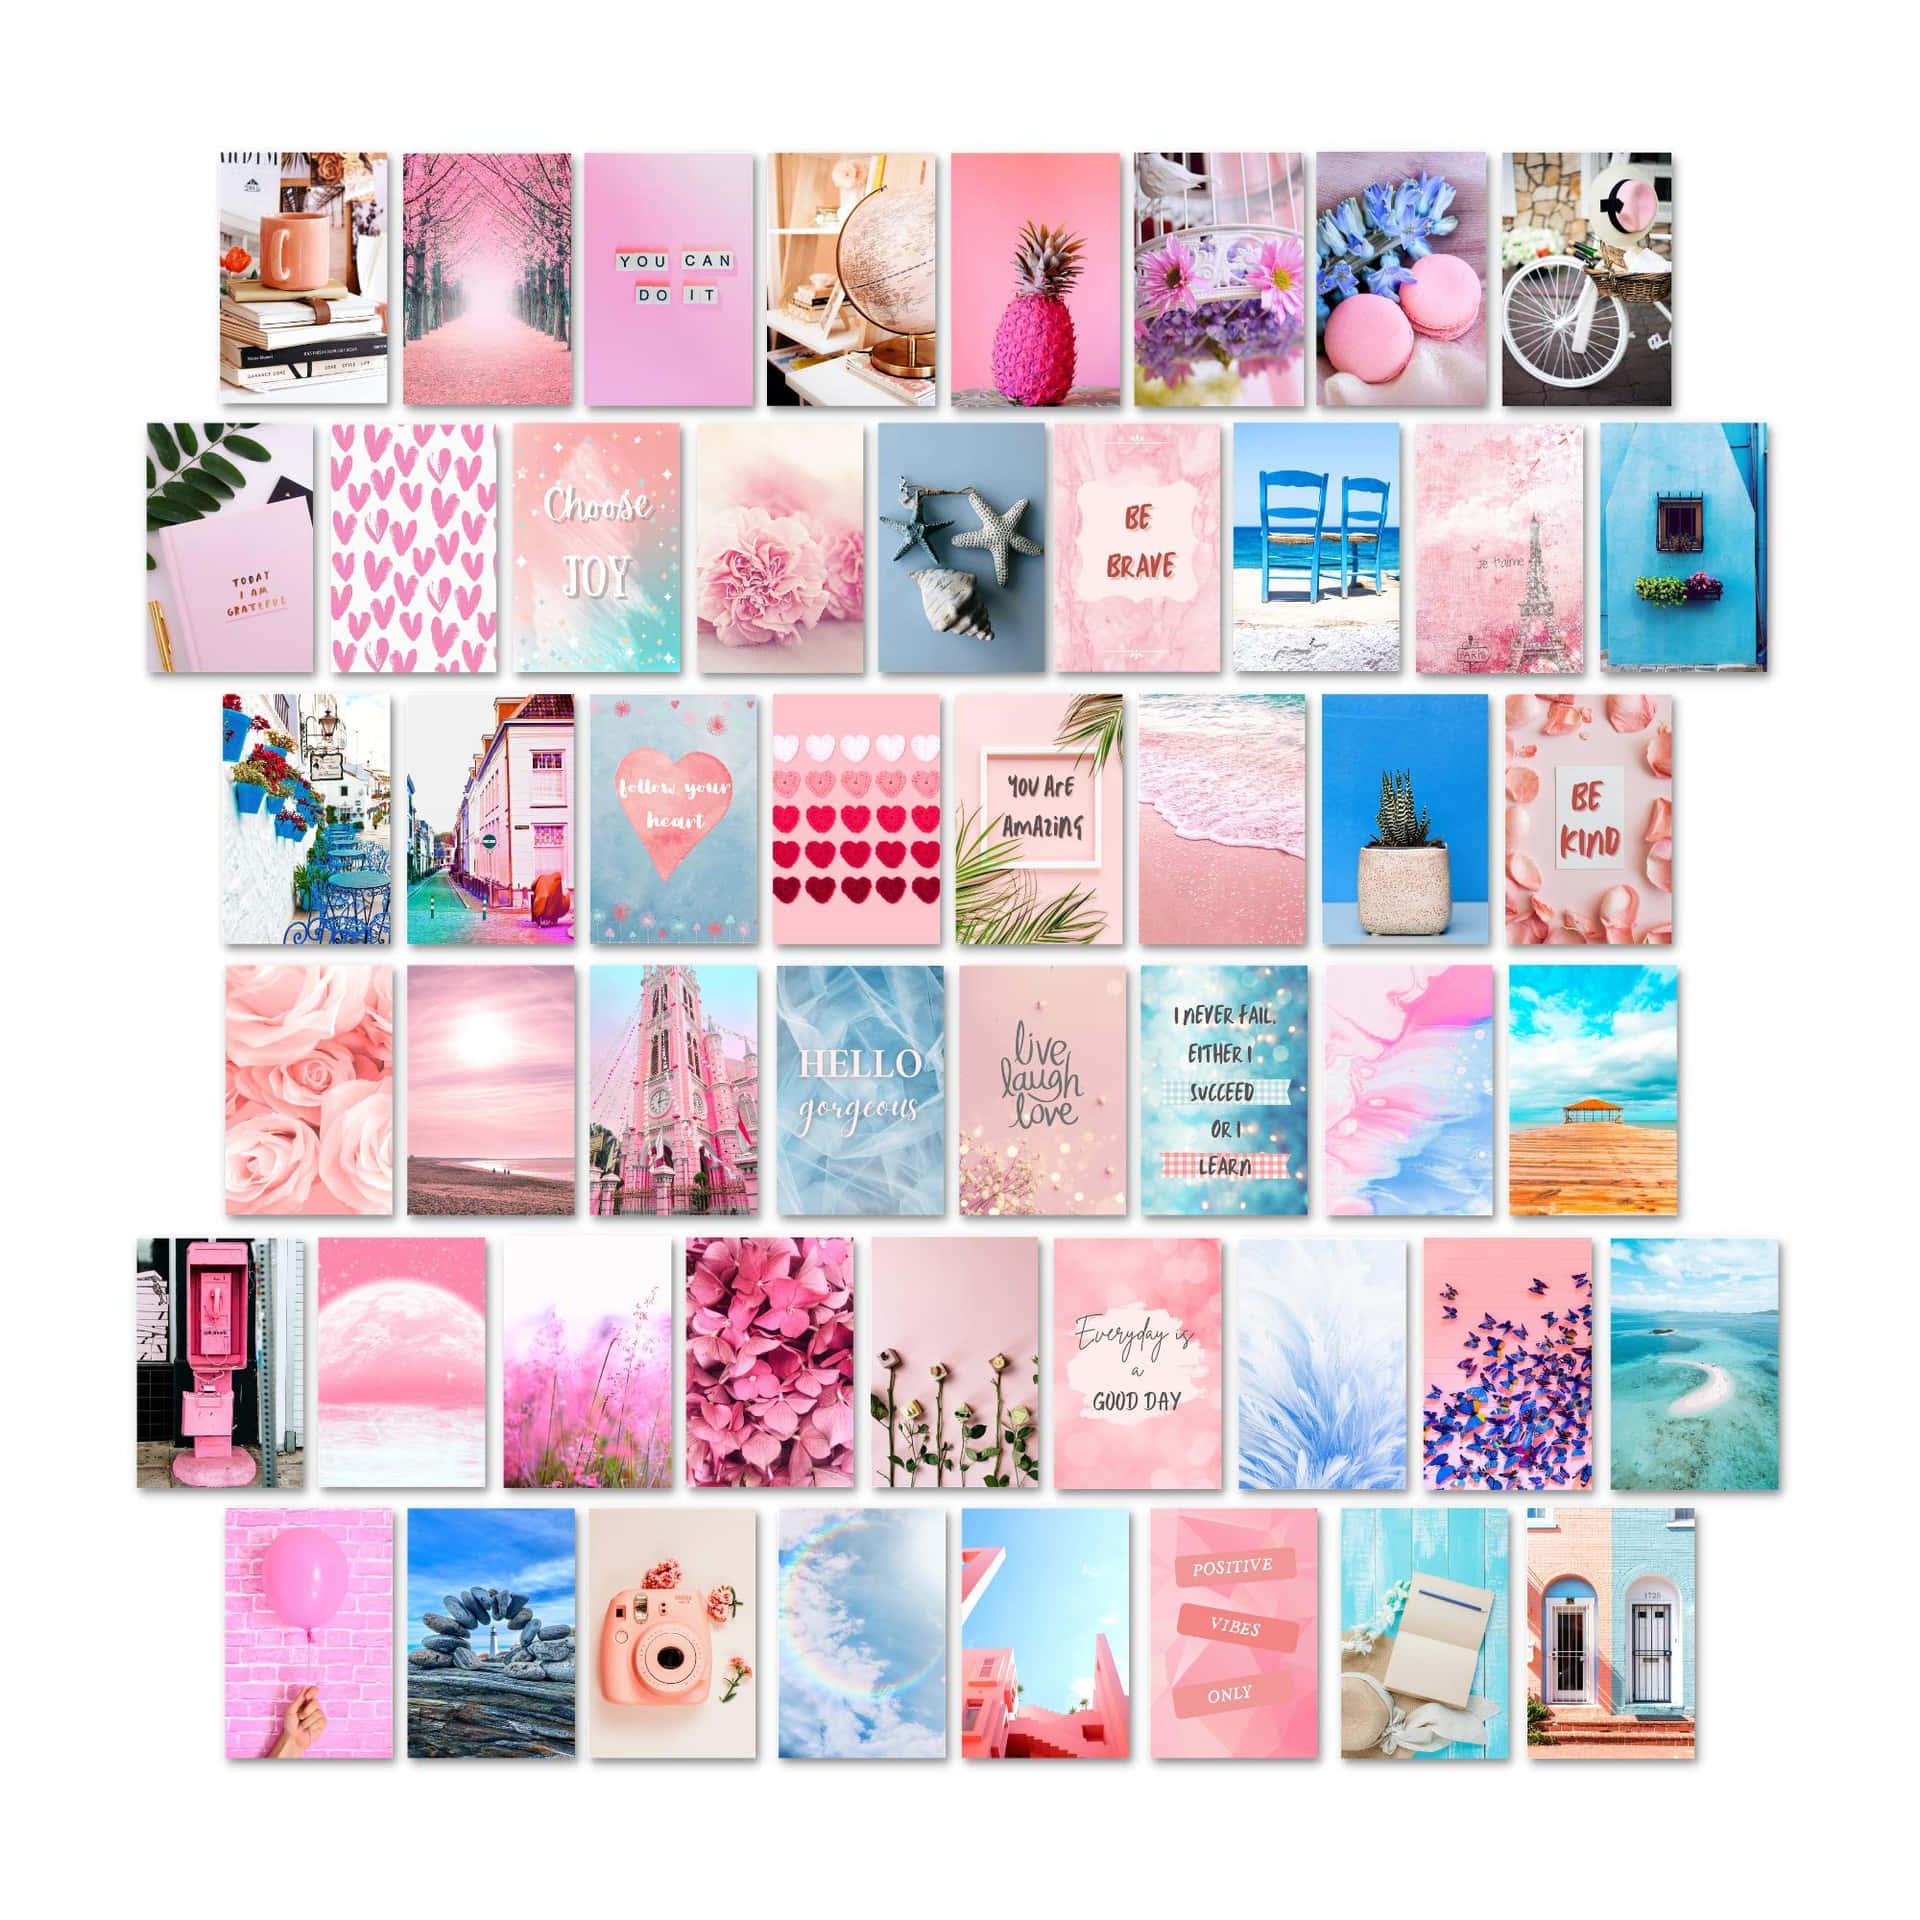 Keep up with the seasons trends with stylish and cute products! Wallpaper